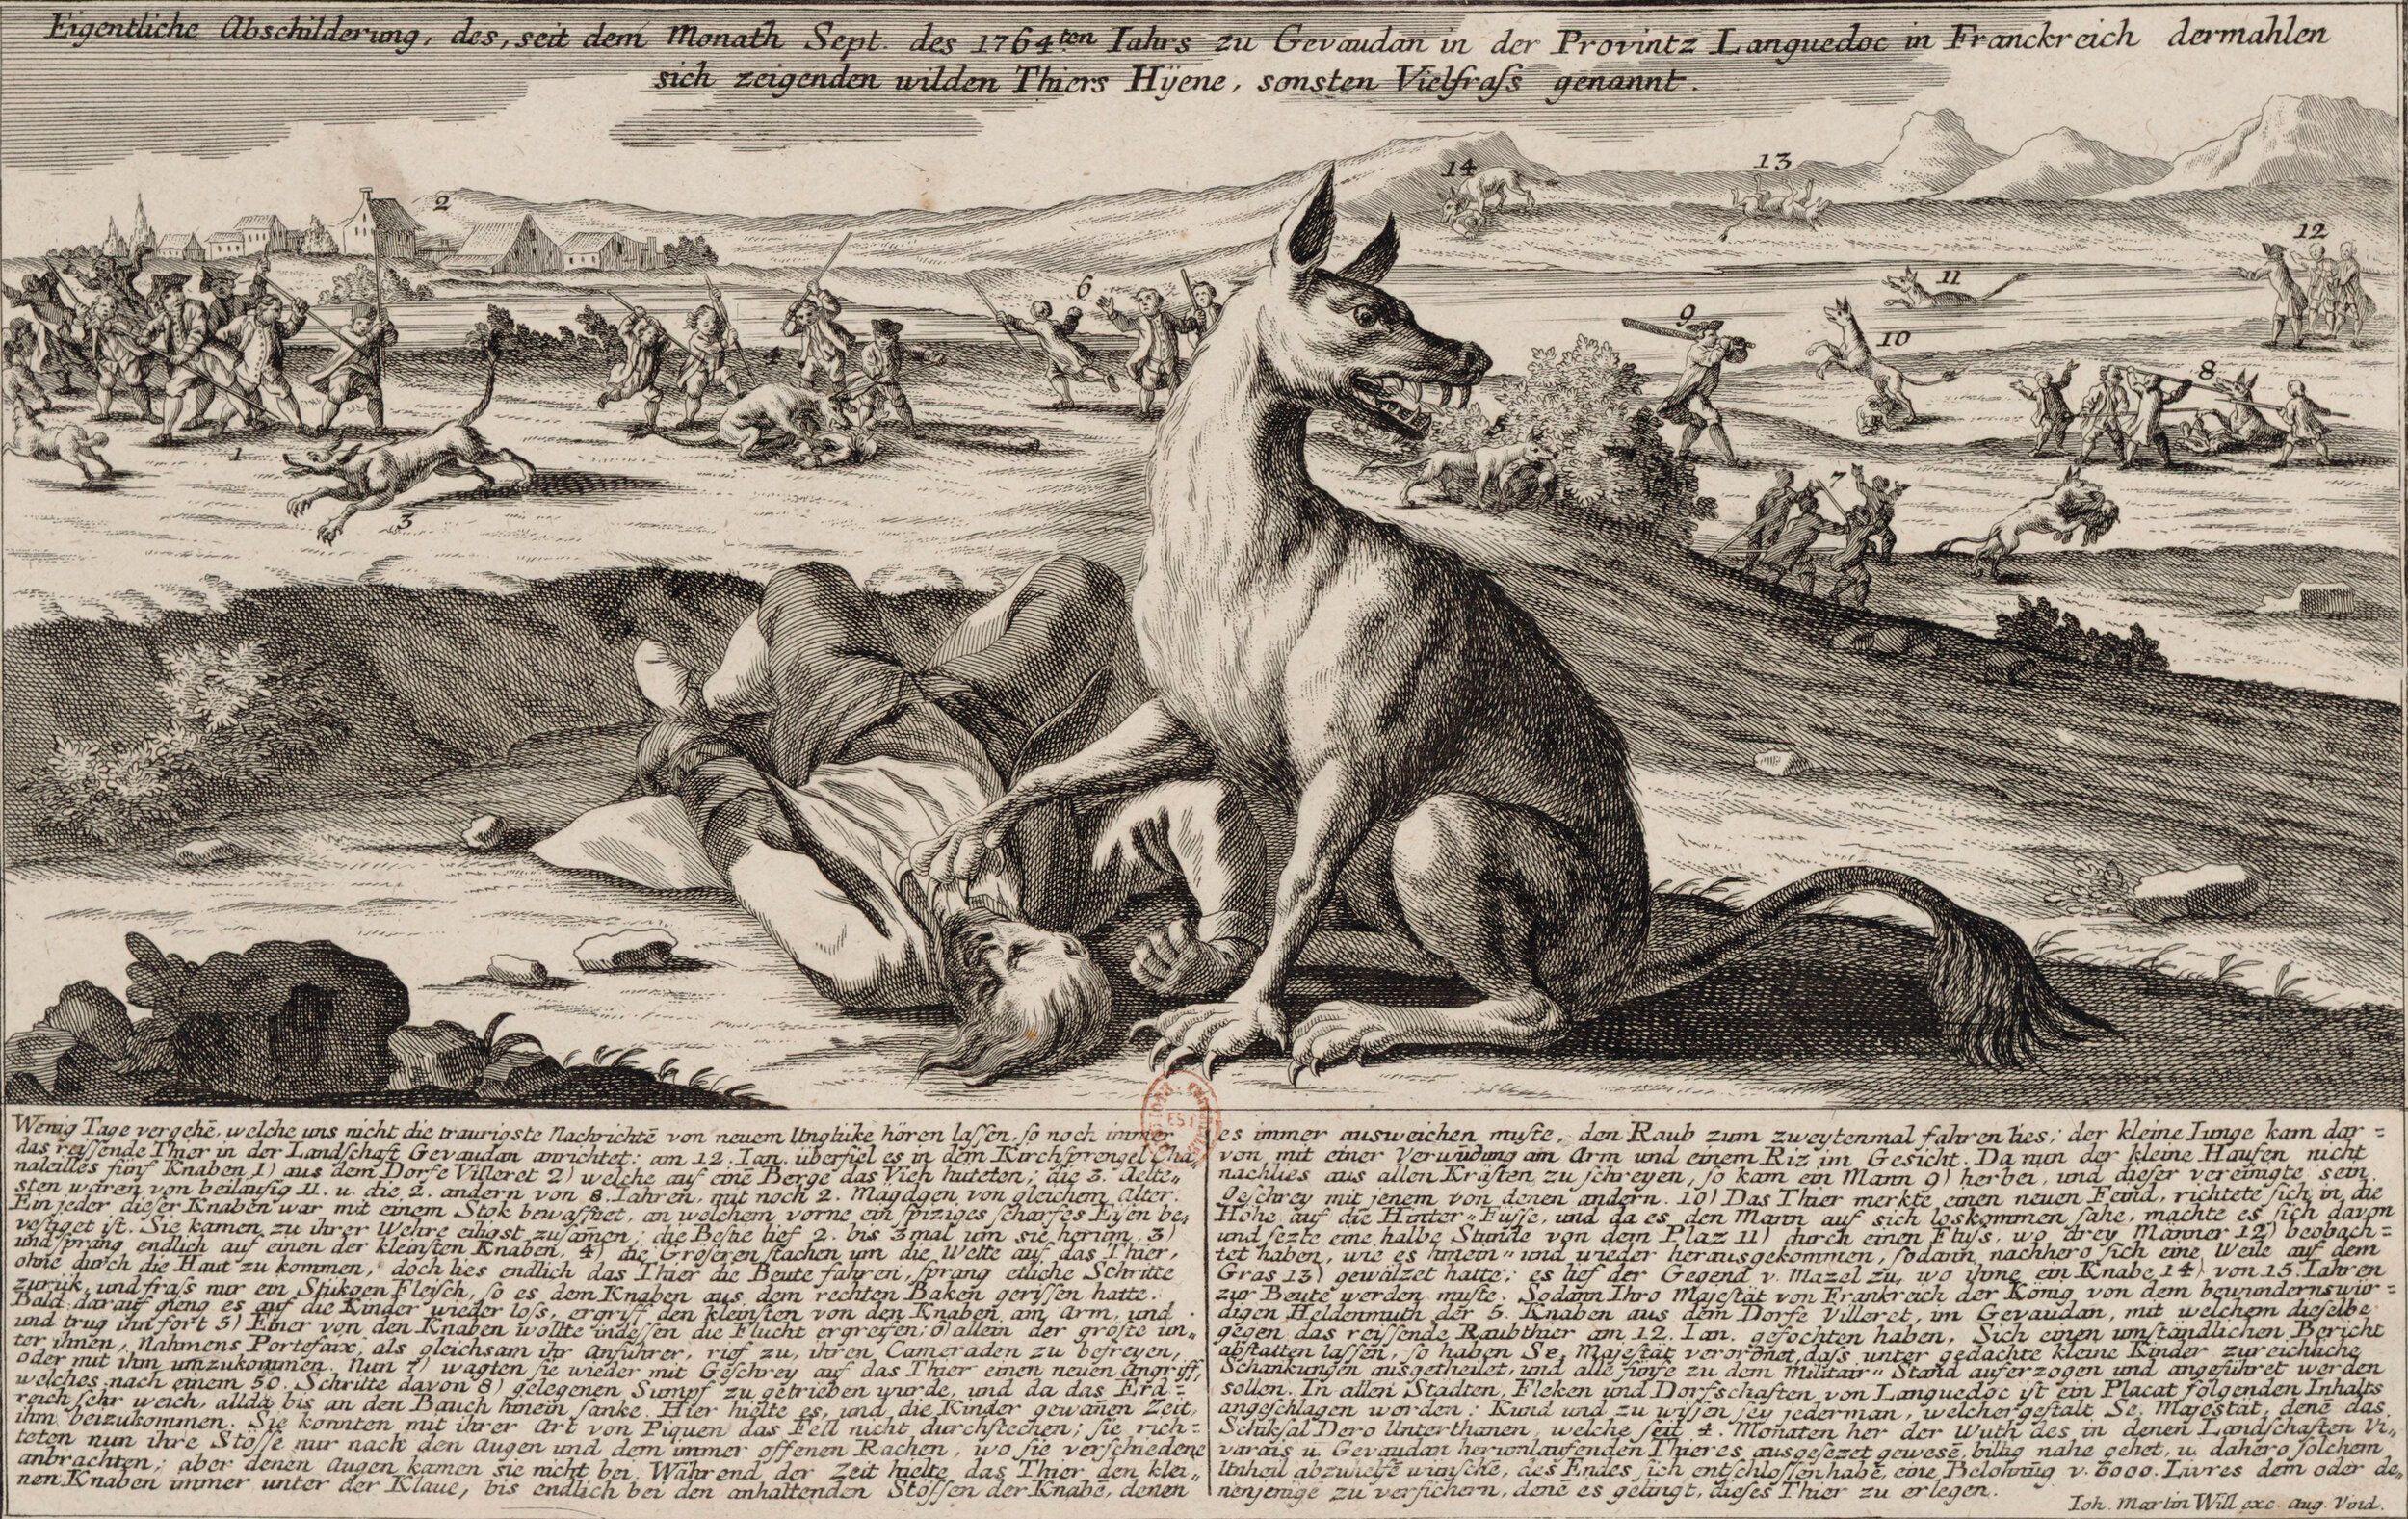  Engraving of the Beast, from the  Gallica Digital Library  